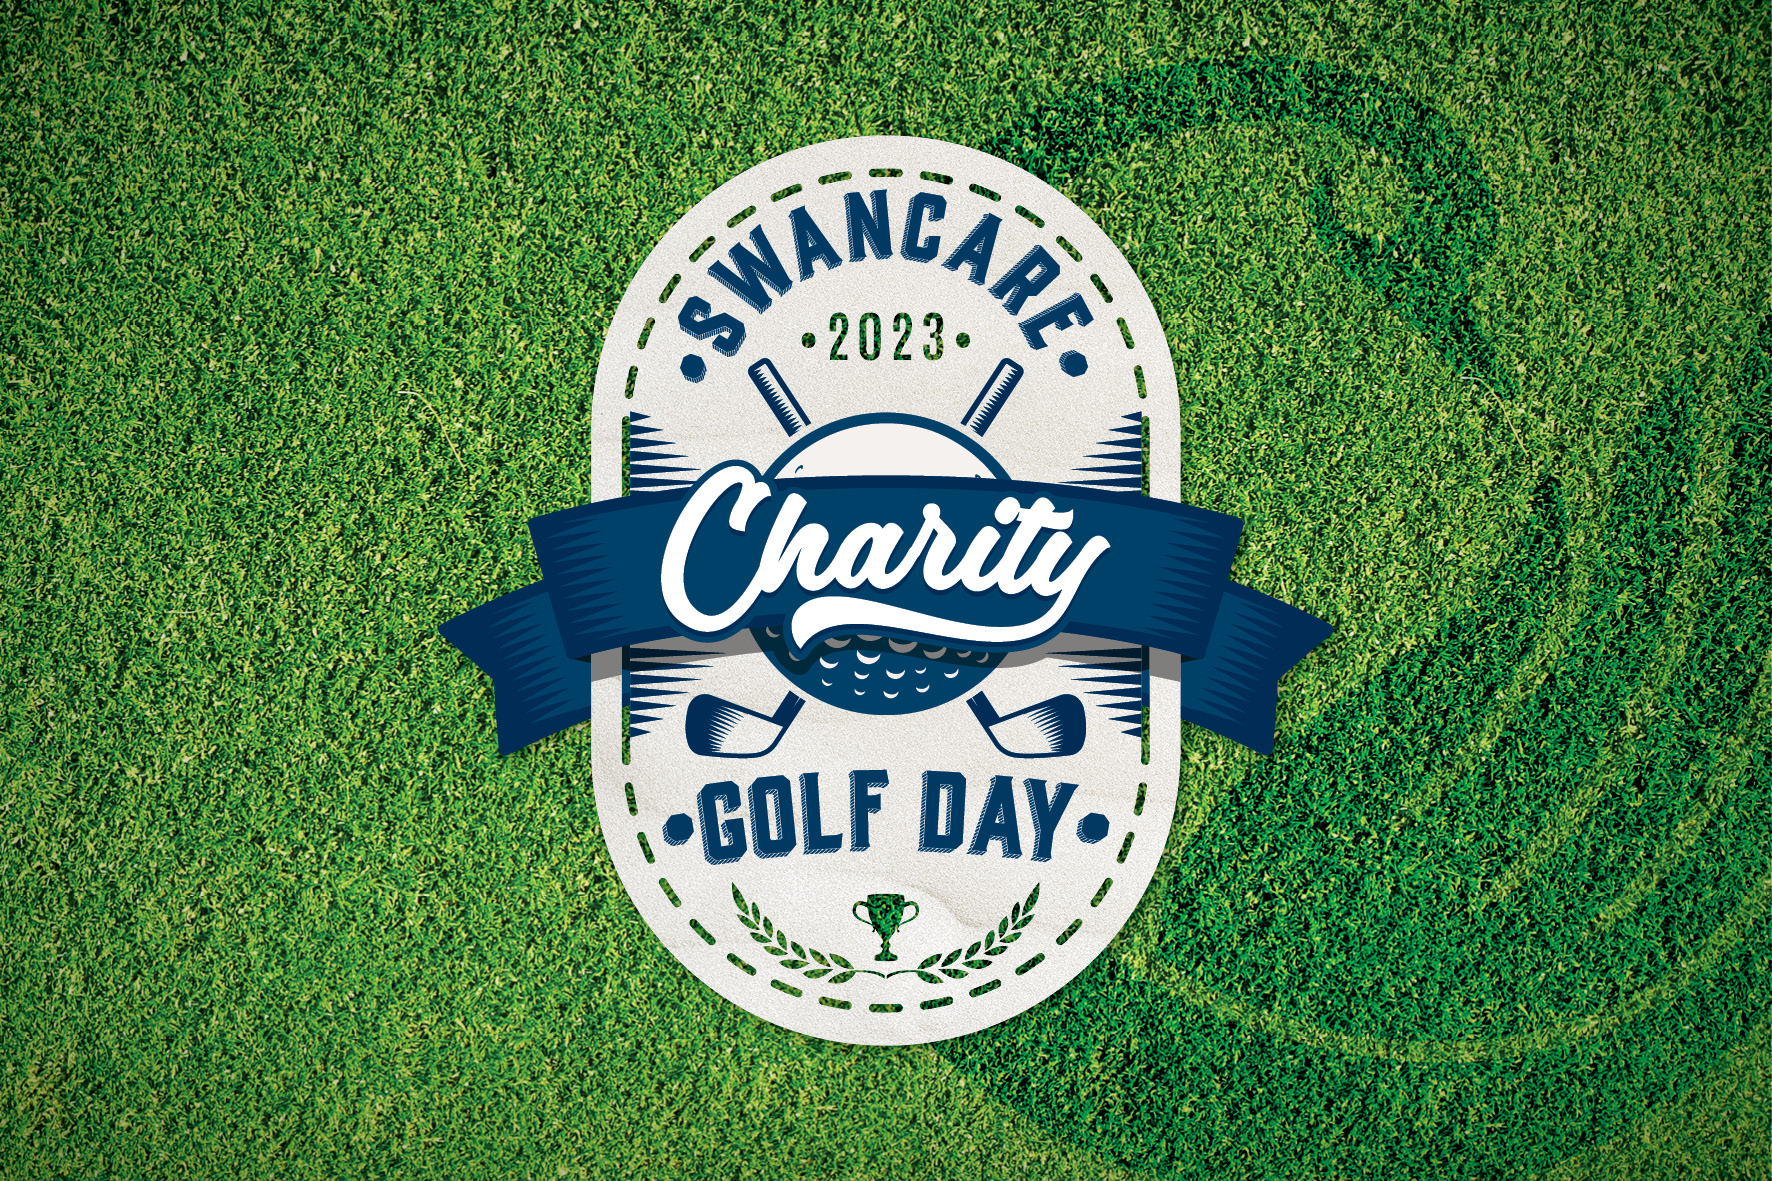 SwanCare Charity Golf Day 2023 Wrap Up